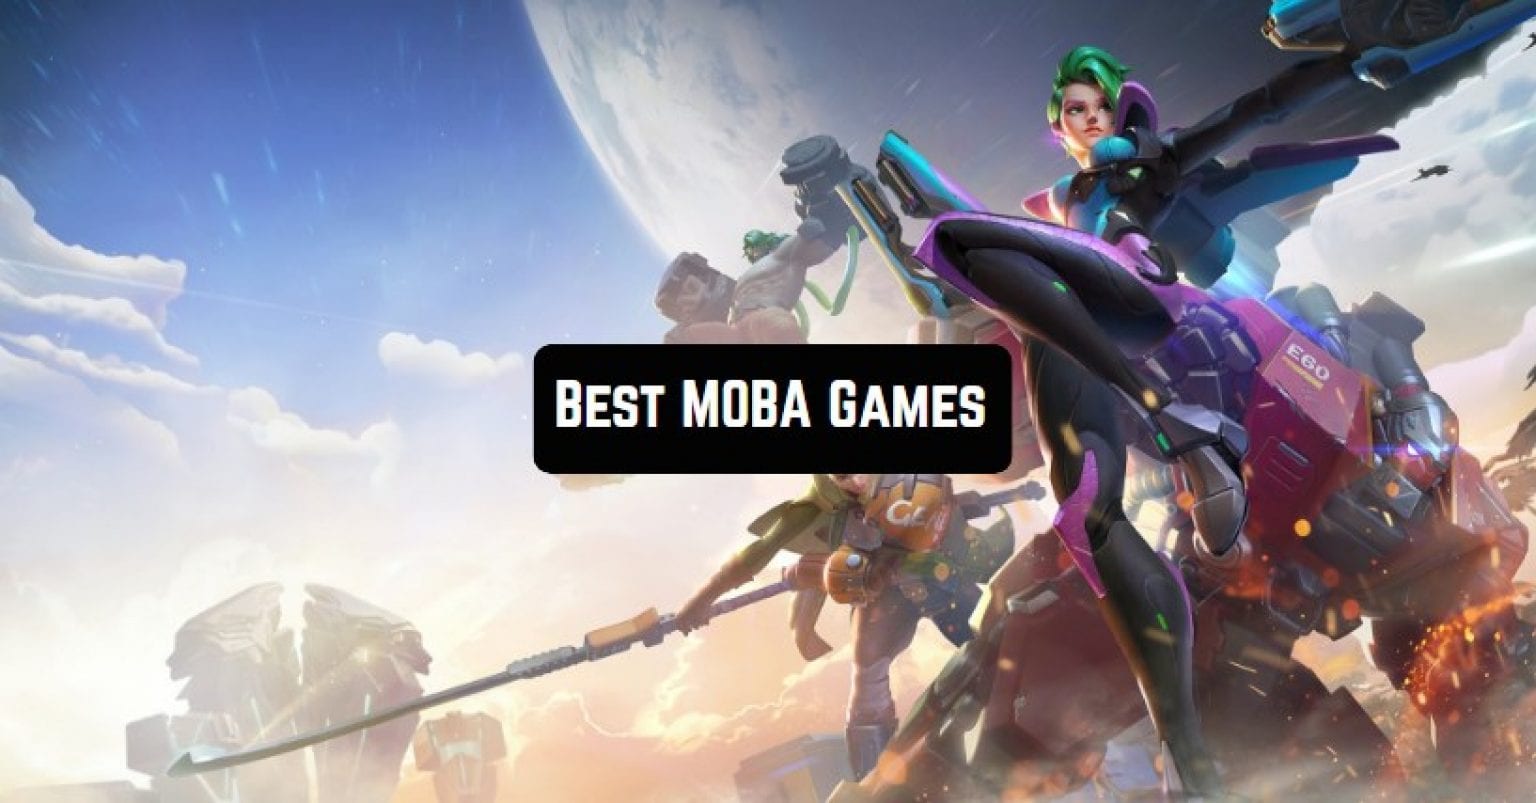 moba games stands for